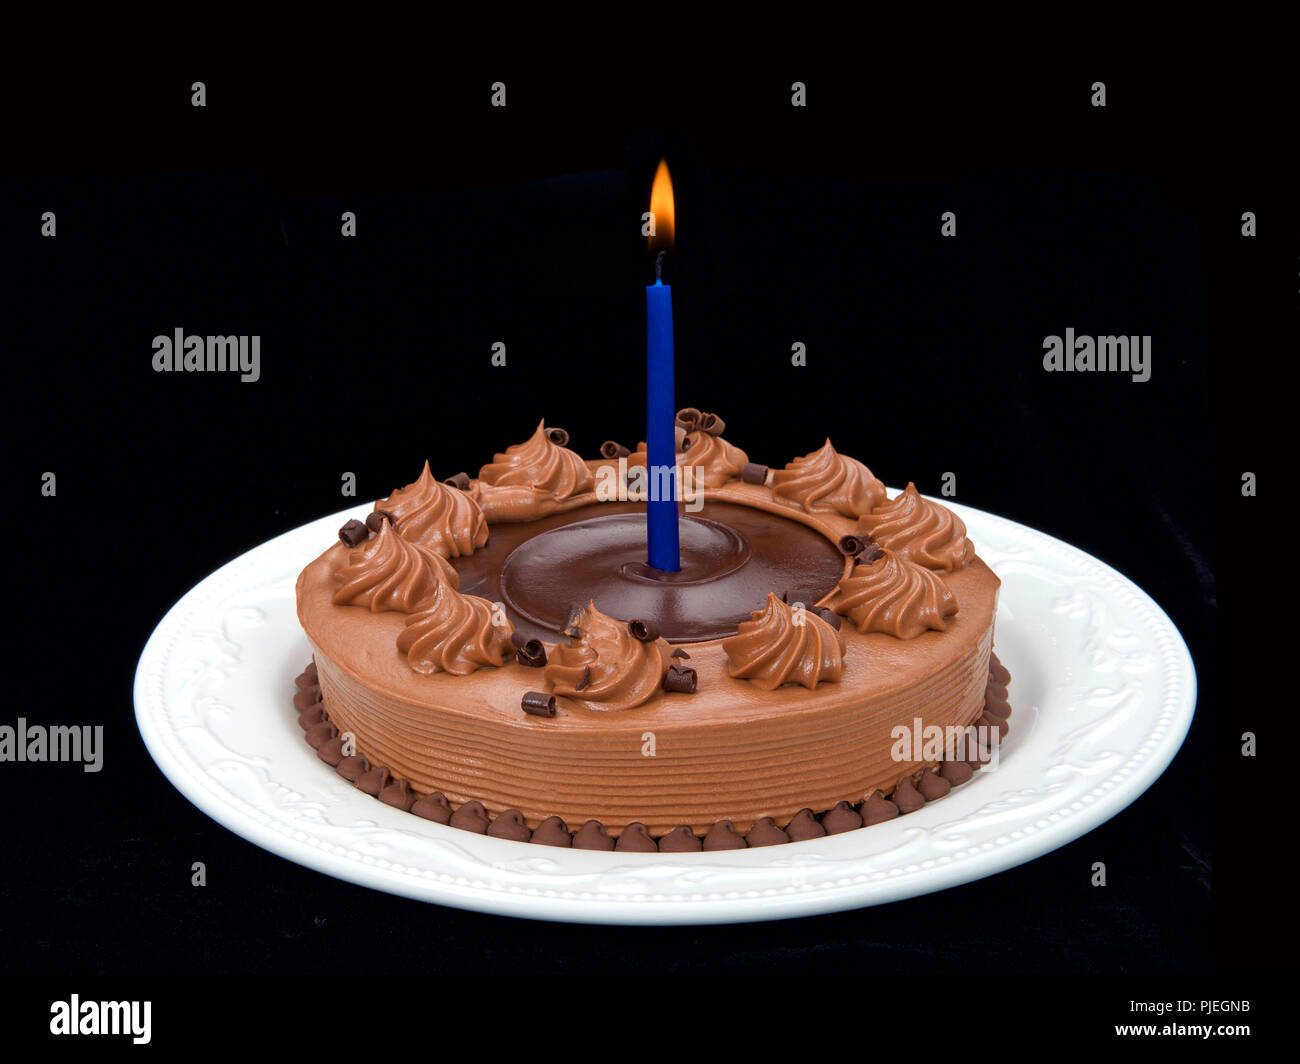 Home made chocolate cake with chocolate fudge on top on an off white porcelain plate with blue candle burning brightly on a black background Stock Photo